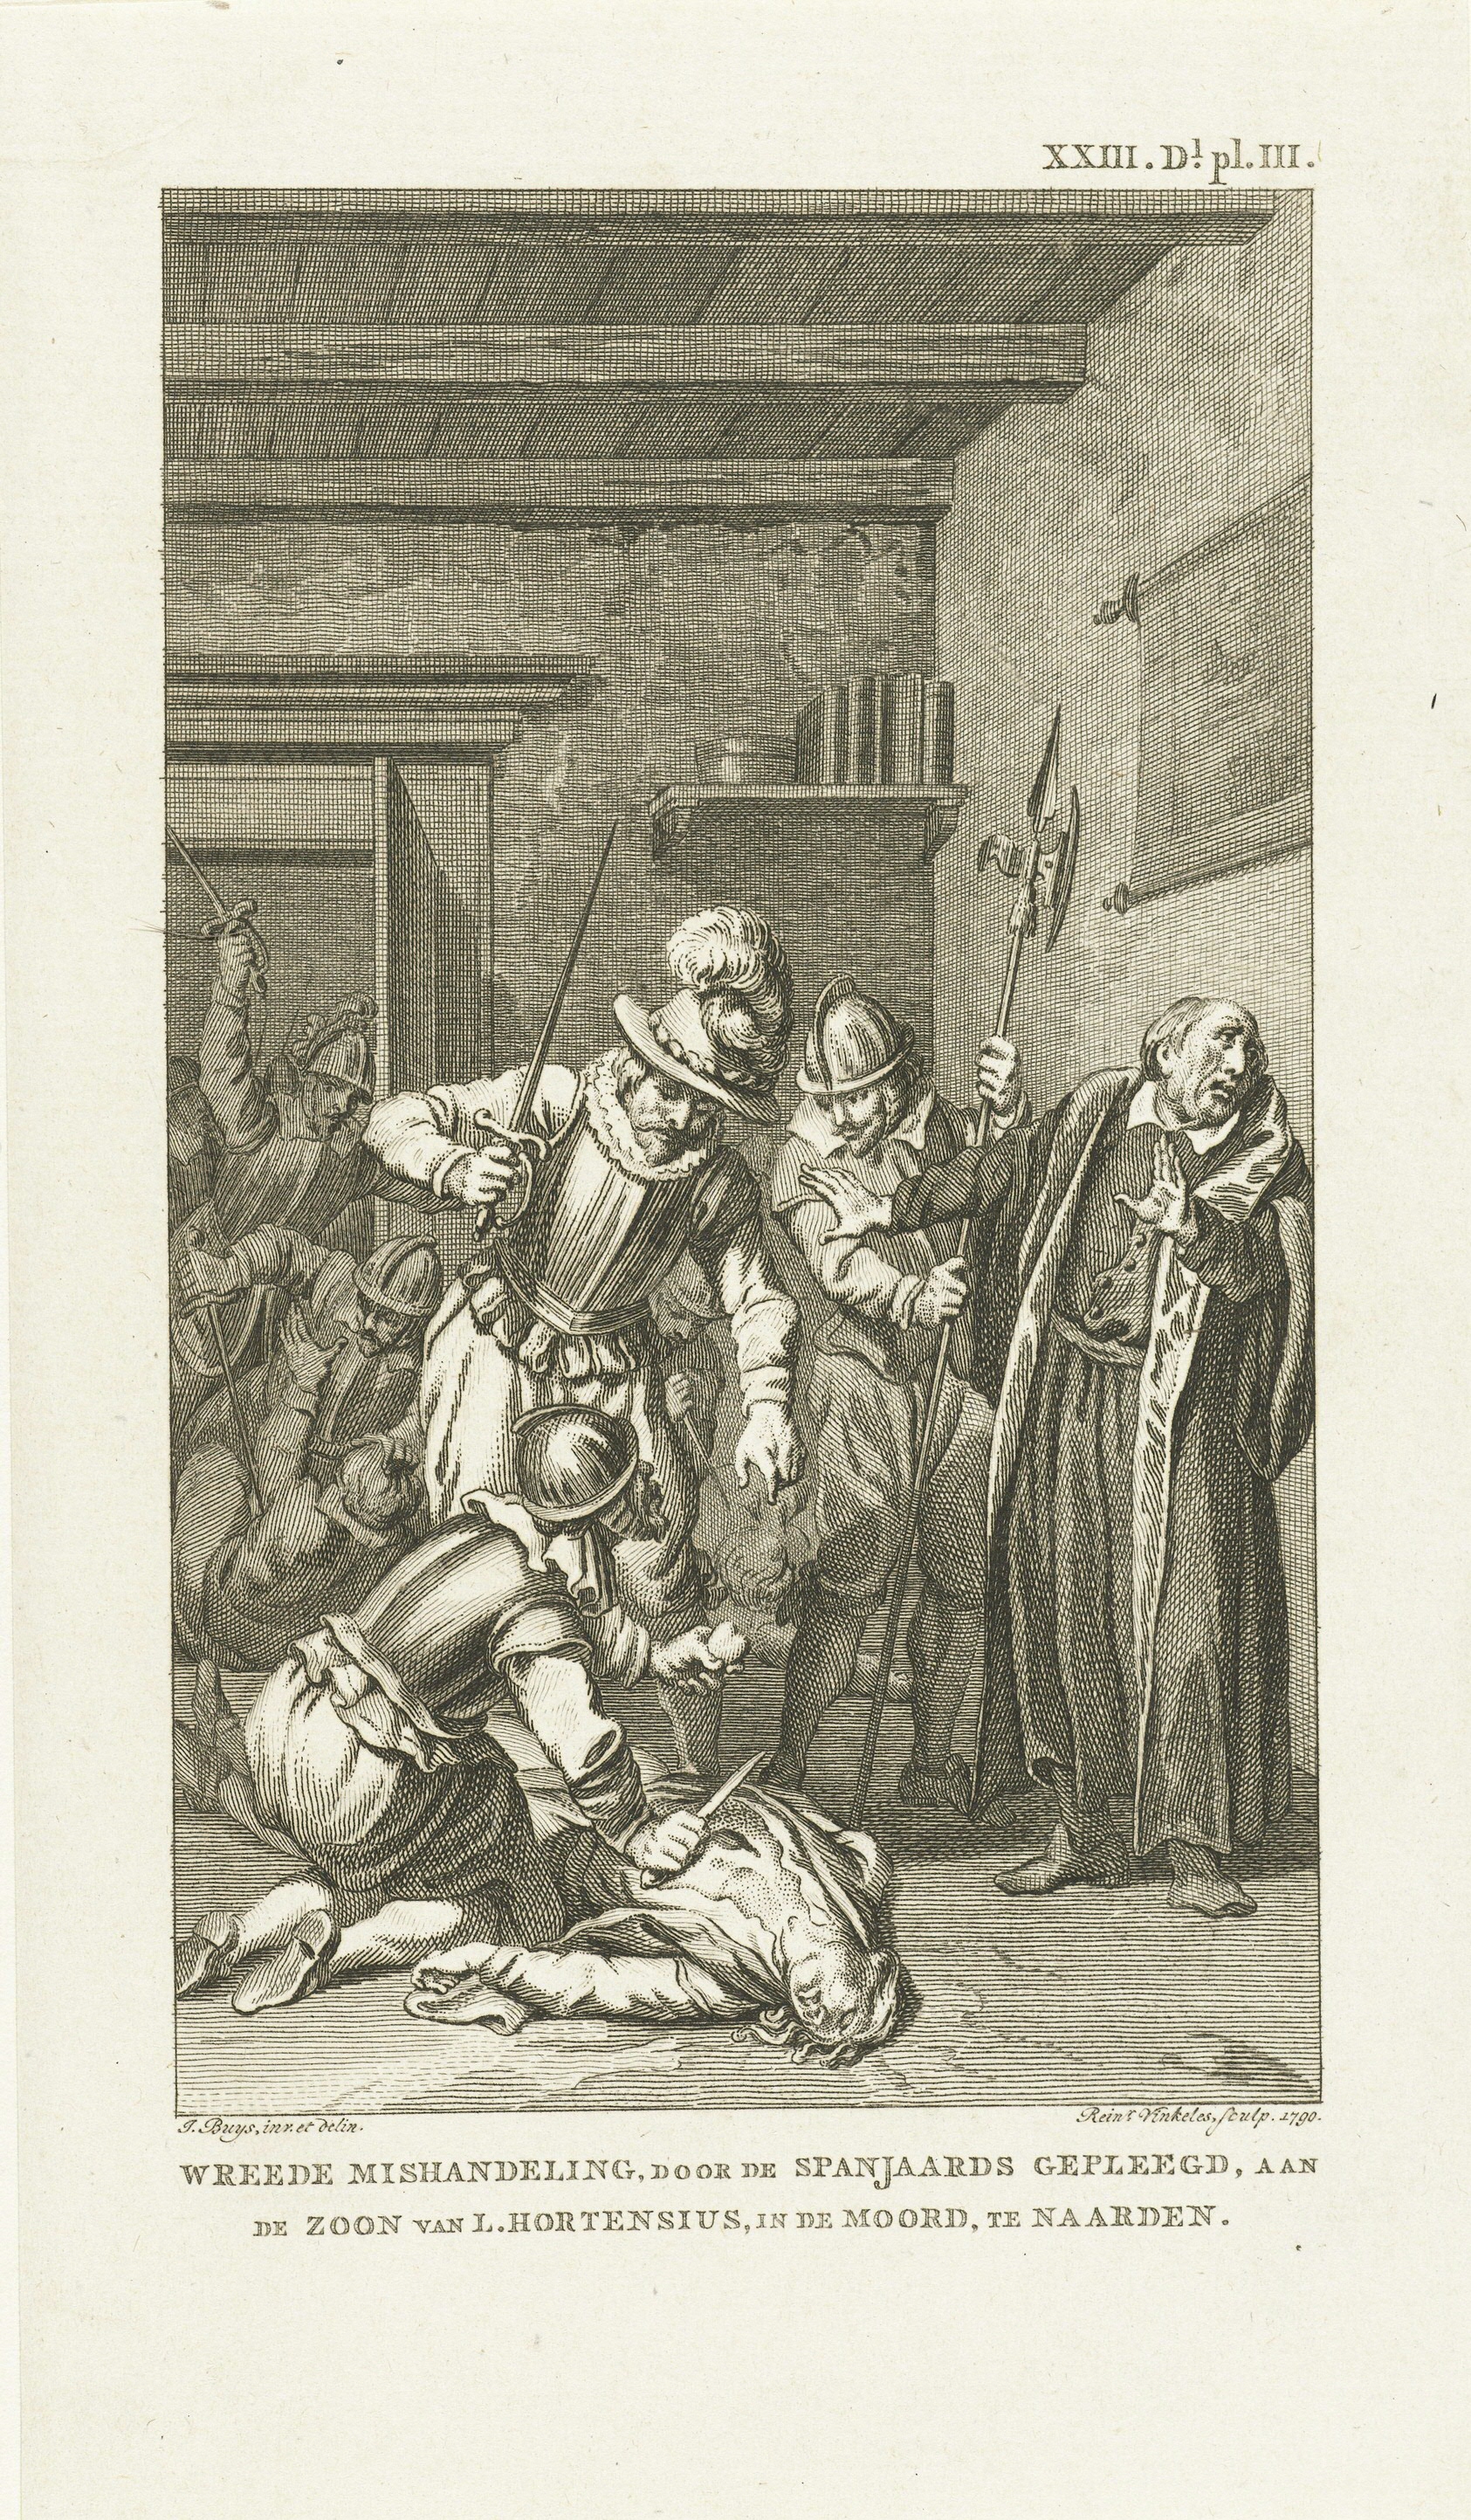 4. L. Hortensius’s son, killed and mutilated by the Spanish, 1572, Reinier Vinkeles (I), based on Jacobus Buys, 1790, etching